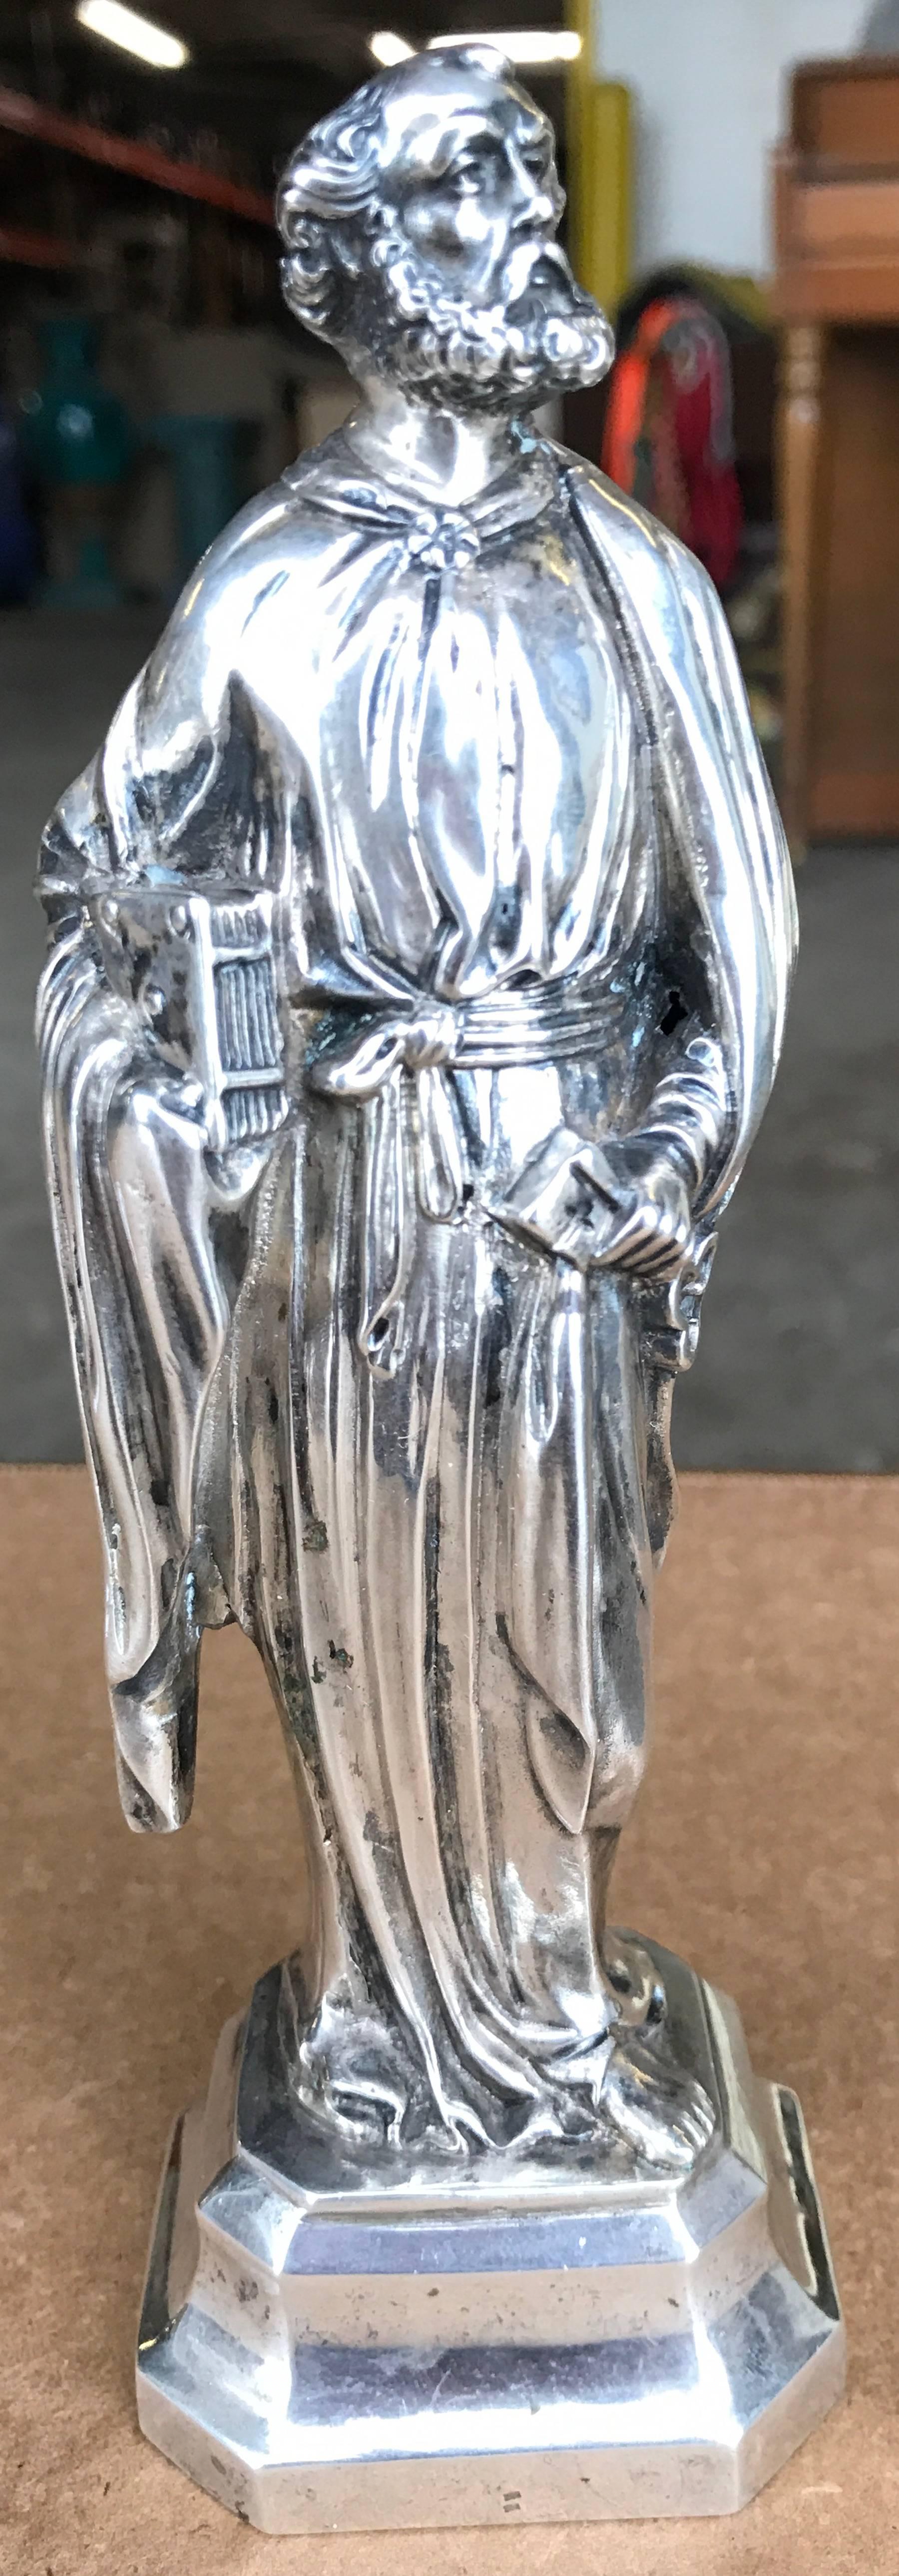 Antique loth silver ecclesiastical figure of Sankt Peter, holding a book and keys standing 6.75